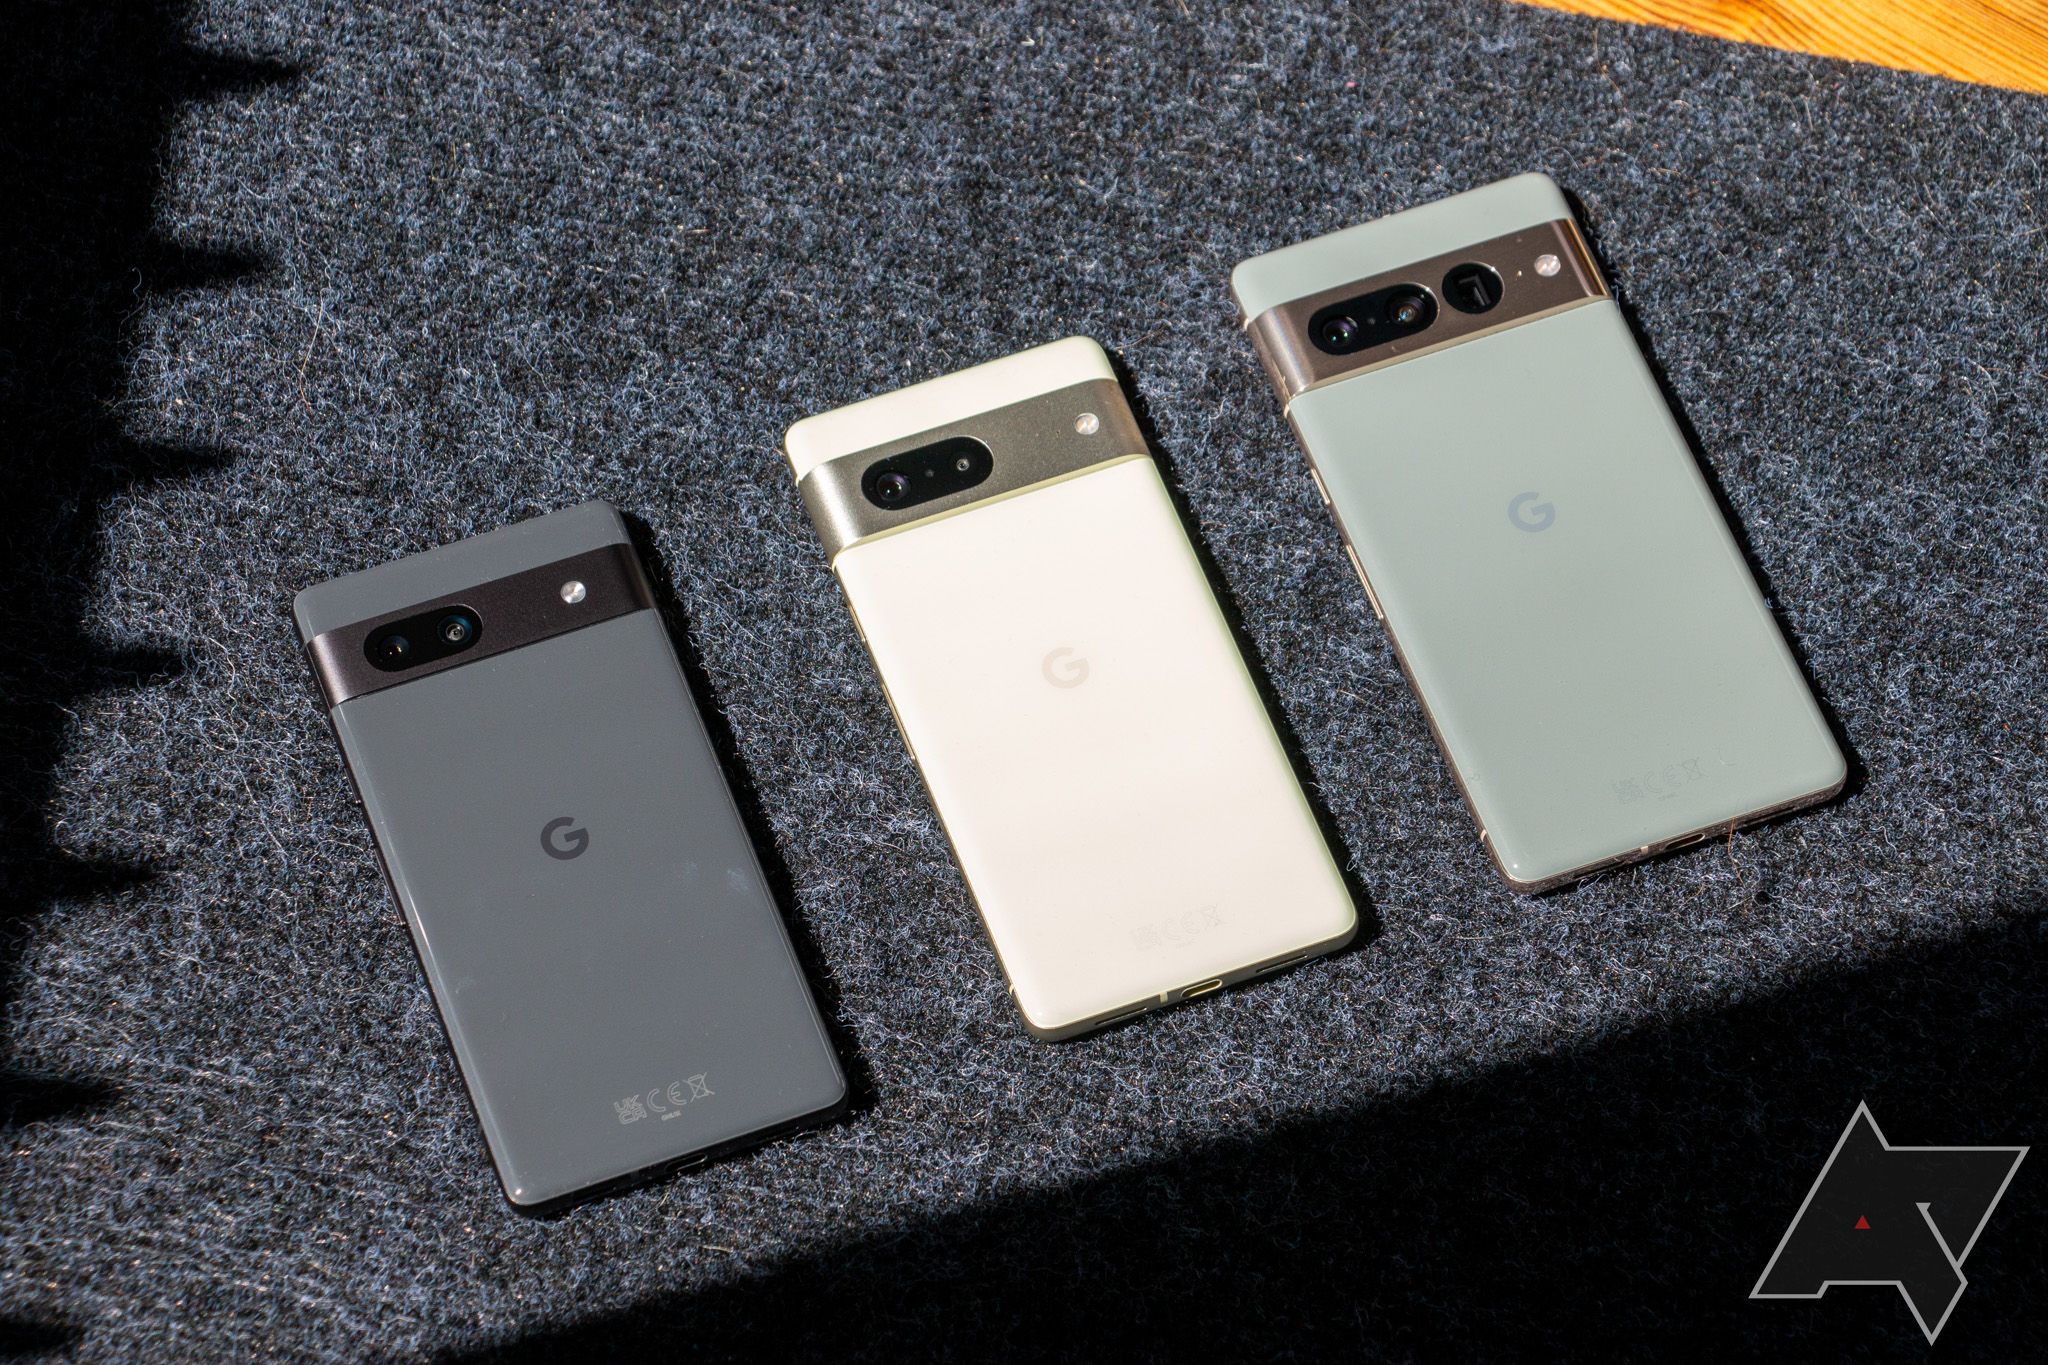 The Pixel 7a next to the Pixel 7 and Pixel 7 Pro